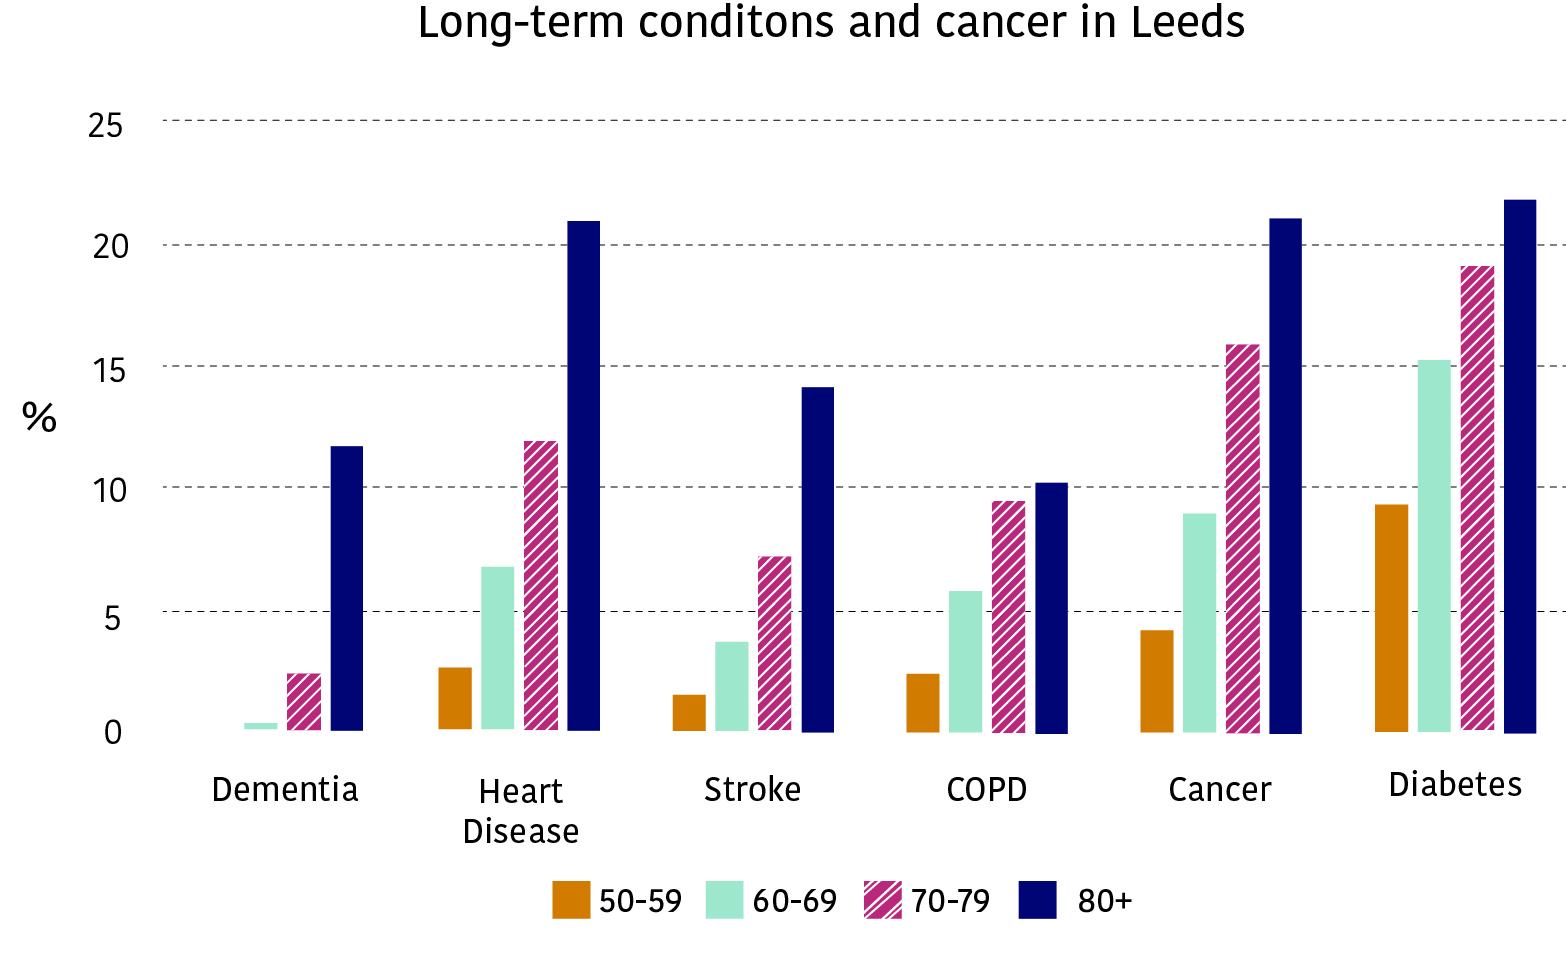 The bar chart shows the frequency of cancer and long term conditions including dementia, heart disease, stroke, COPD (Chronic Obstructive Pulmonary Disease) and diabetes increasing within older populations. People aged 80+ have the highest incidences of long-term conditions and cancer followed by people aged 70-79.